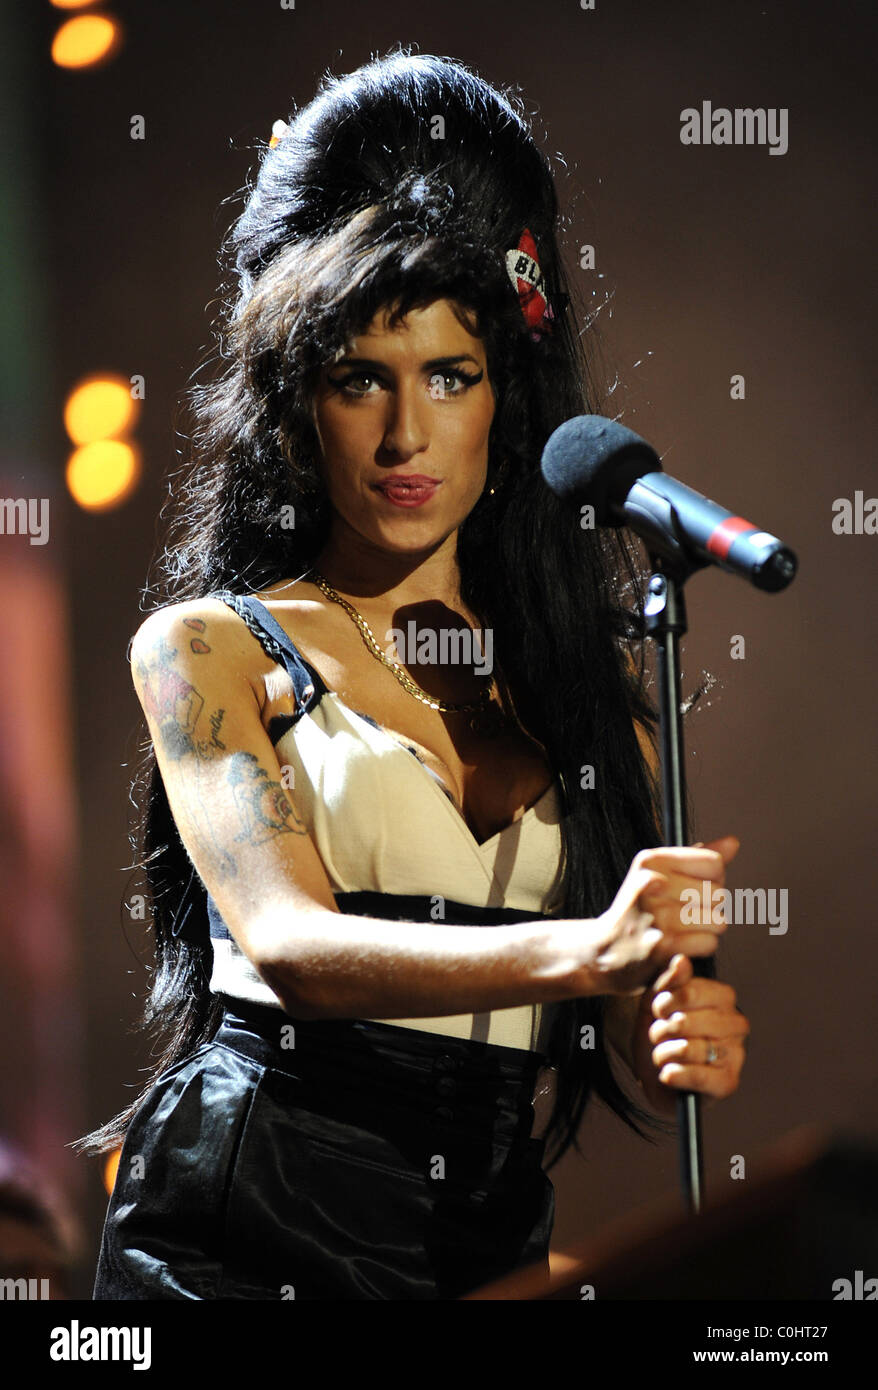 Amy Winehouse at Nelson Mandela's 90th Birthday Concert in Hyde Park. London, England - 27.06.08 Stock Photo - Alamy